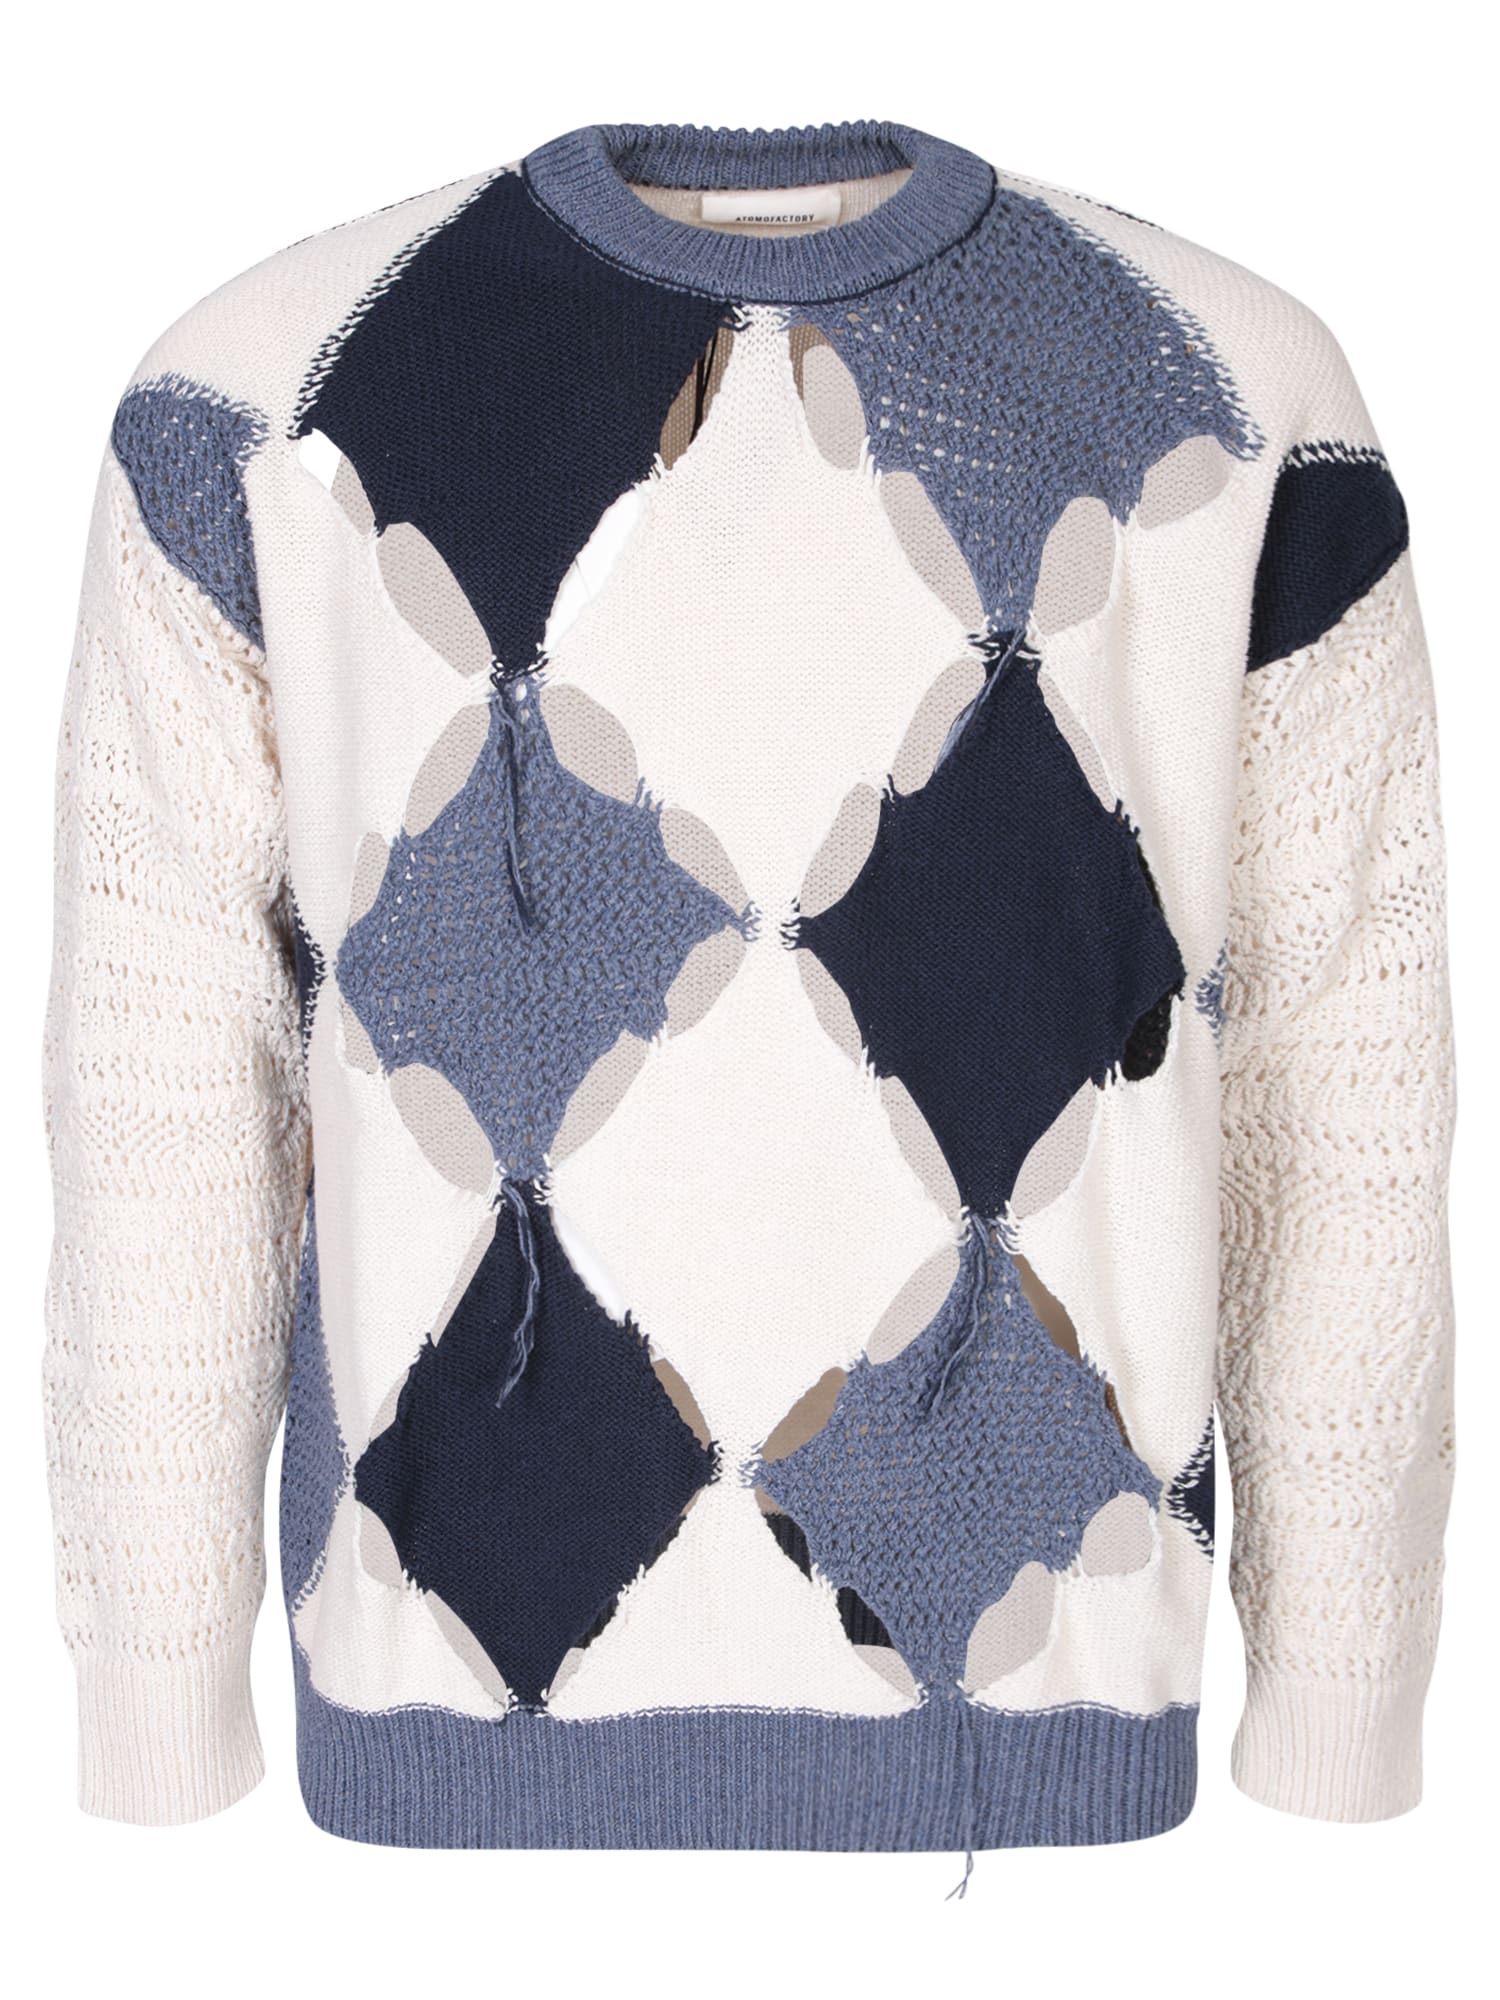 Atomo Factory Blue Cream Cut Out Sweater With Rhombuses In Multi